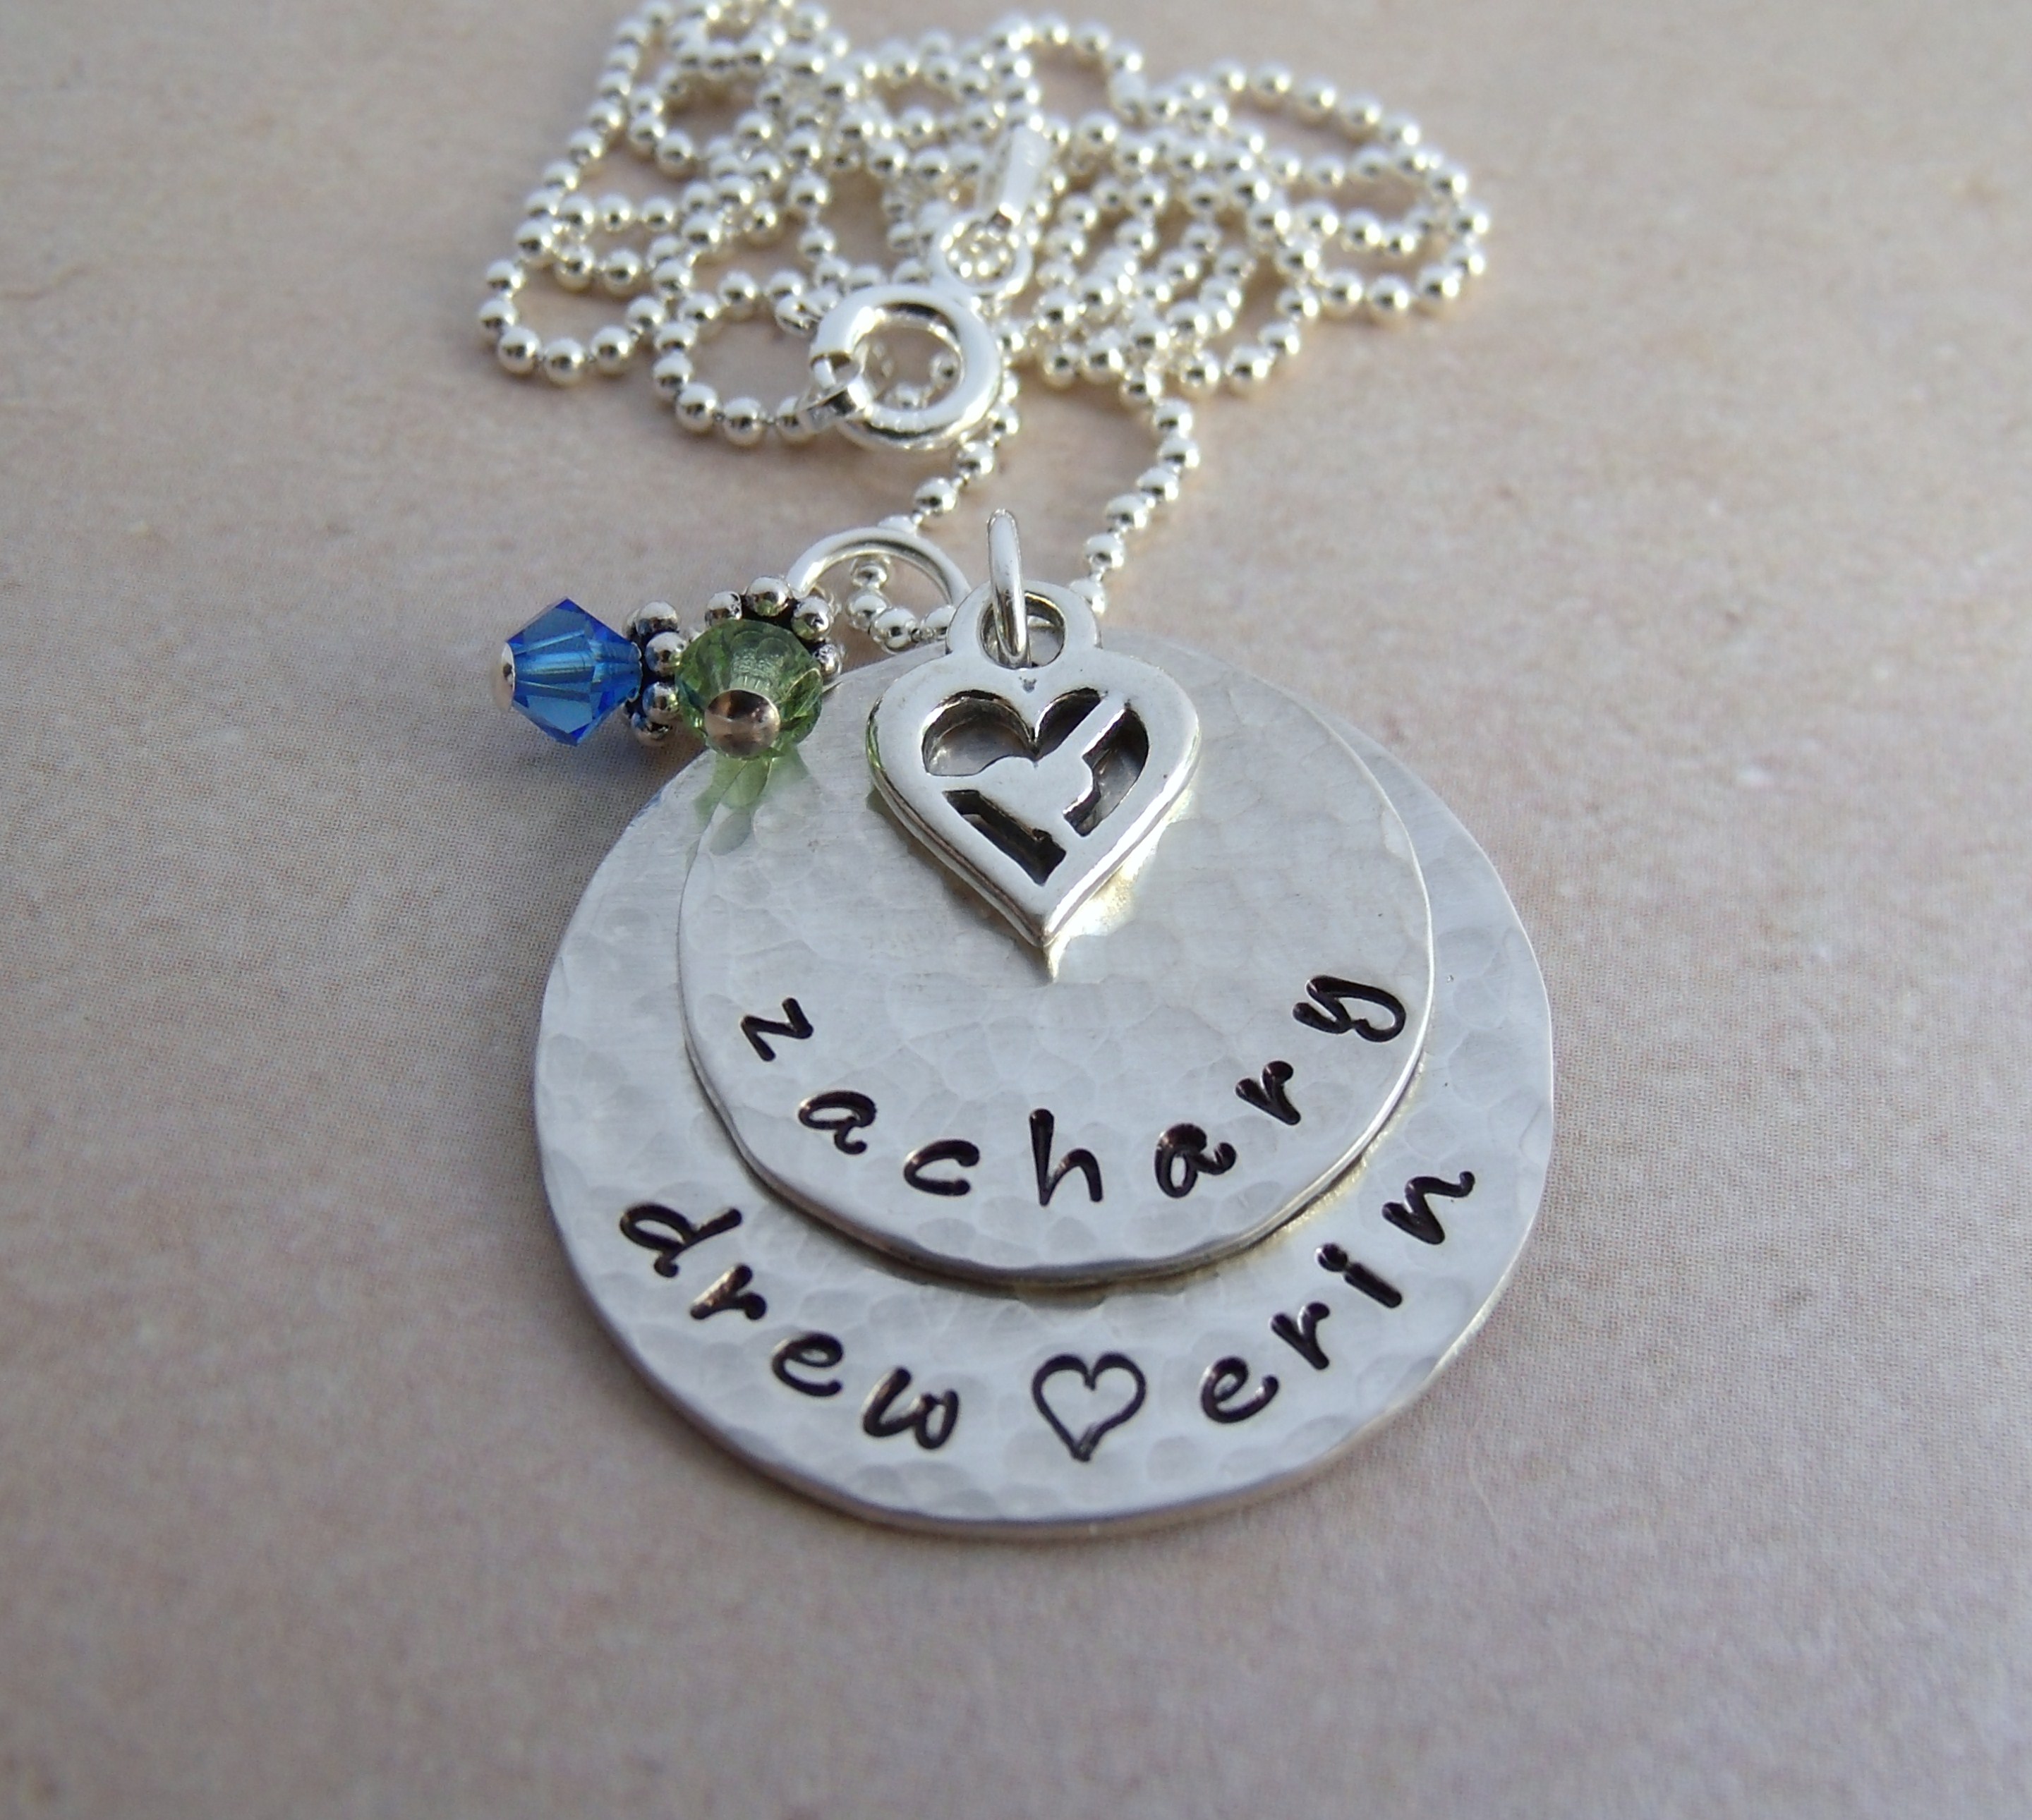 Personalized Mother's Necklace - Hand Stamped Sterling Silver Brag ...